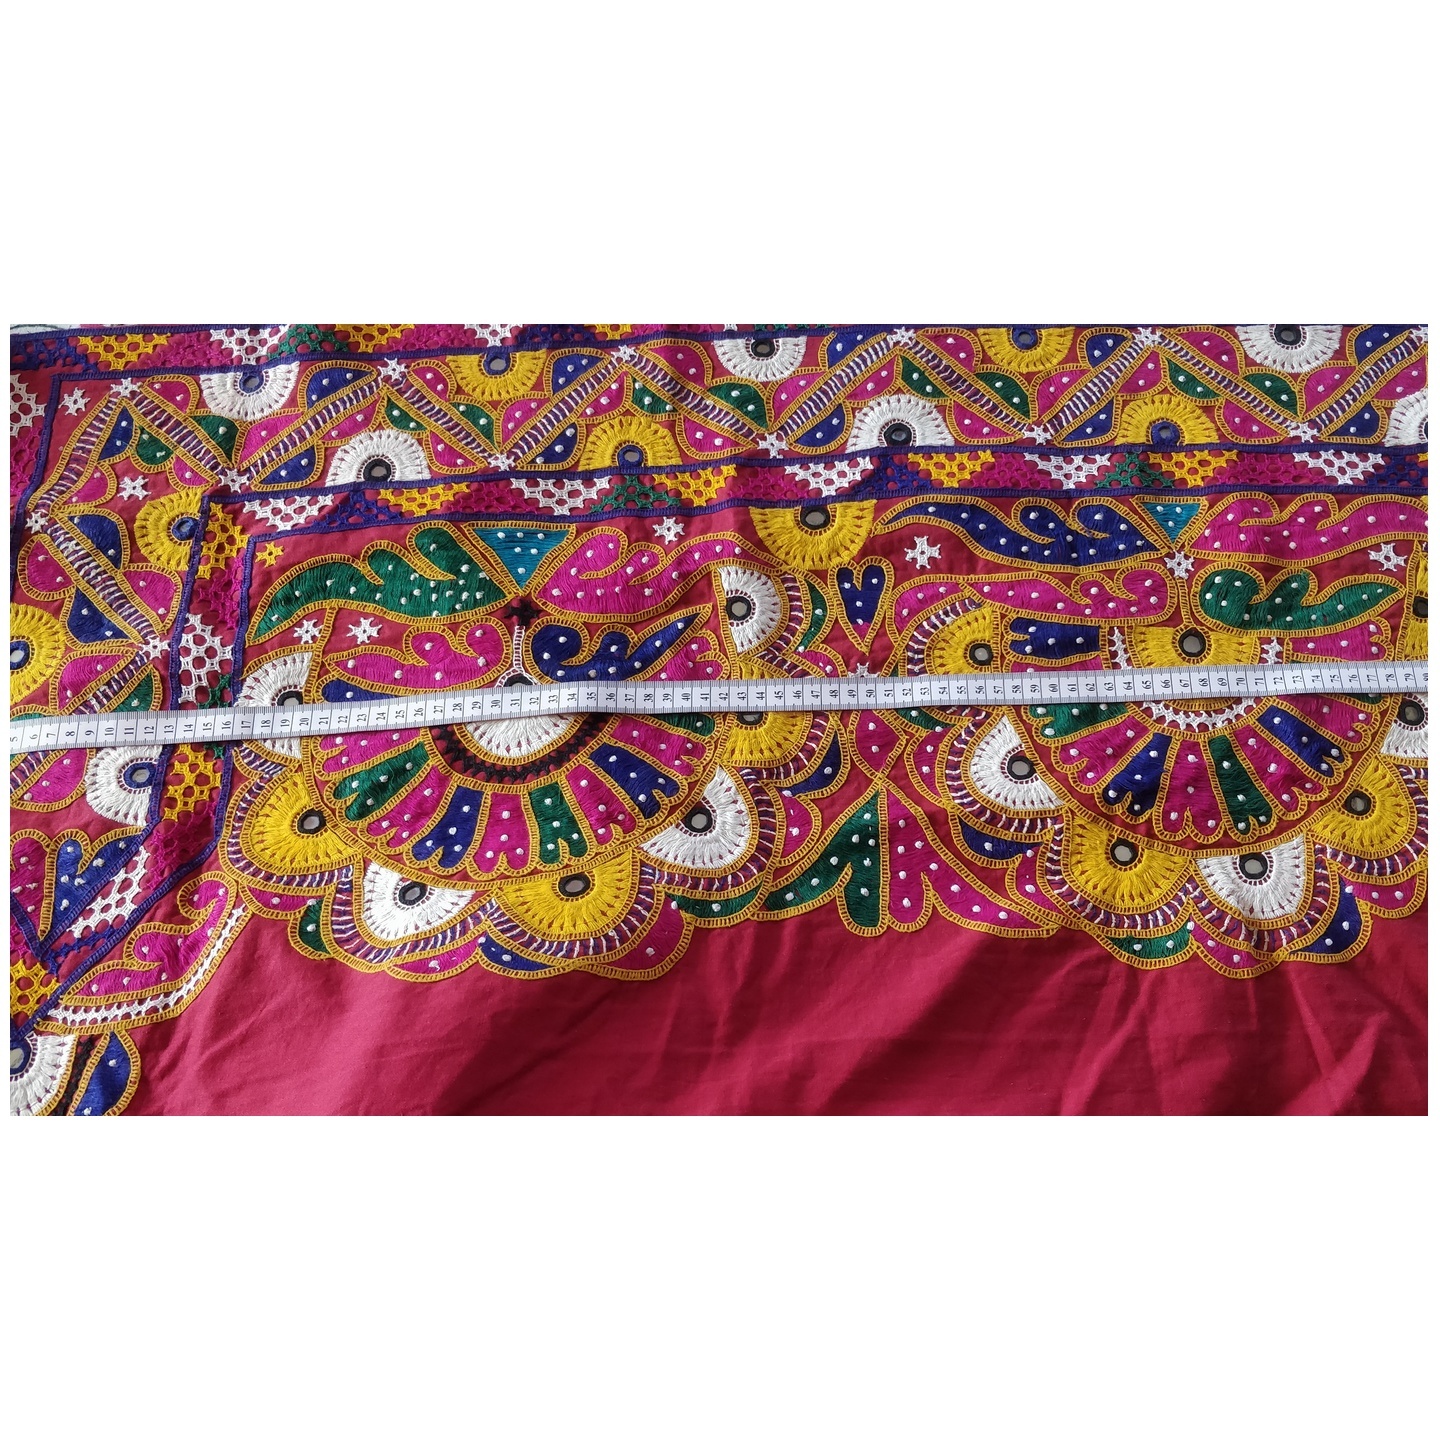 DKW03 - Kutch work hand embroidered Fabric